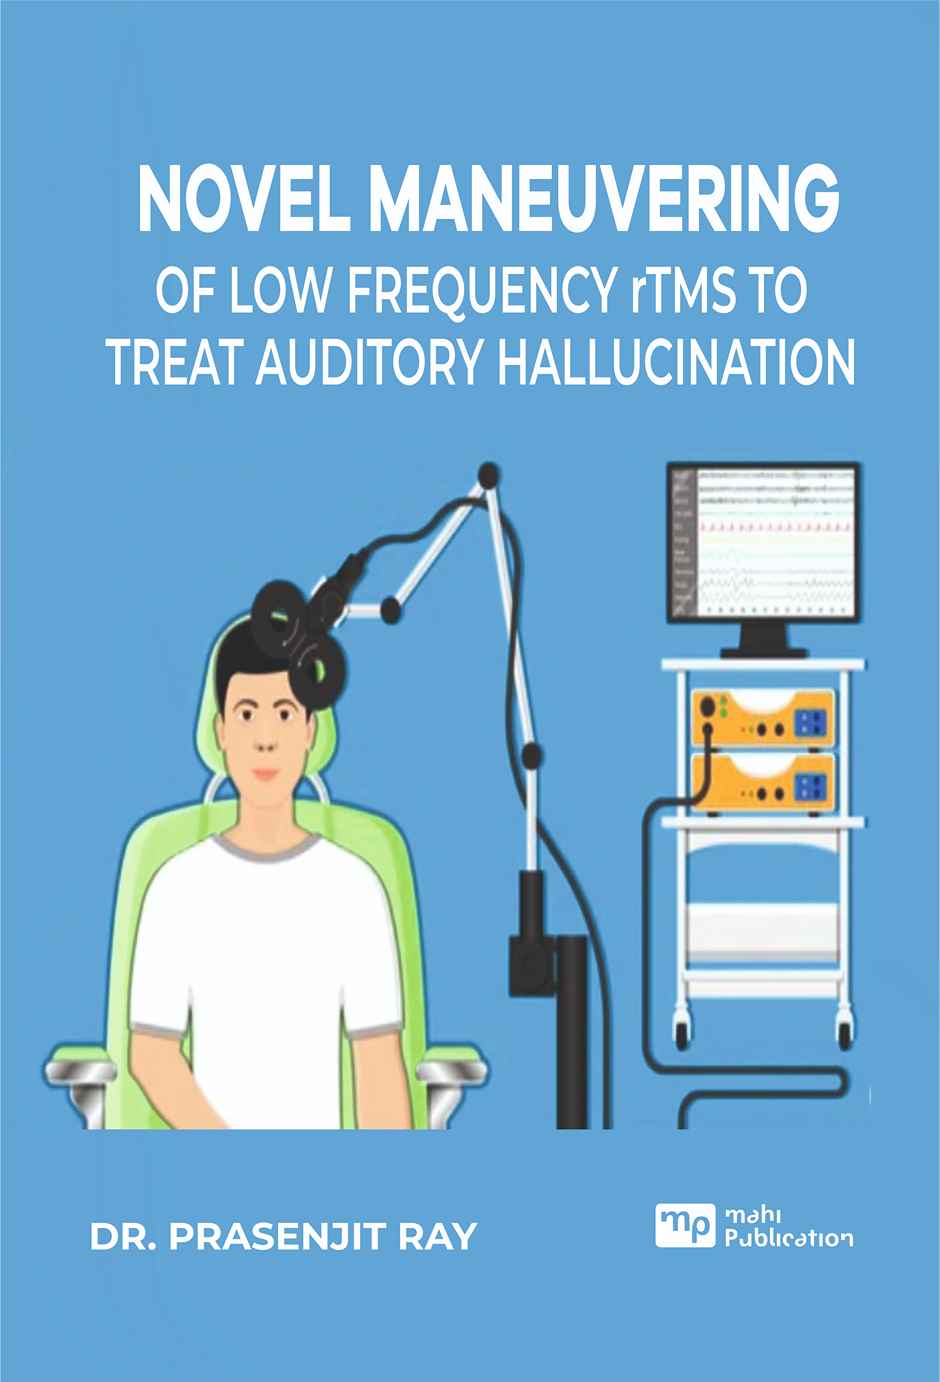 Novel Maneuvering of Low Frequency rTMS tov Treat Auditory Hallucination